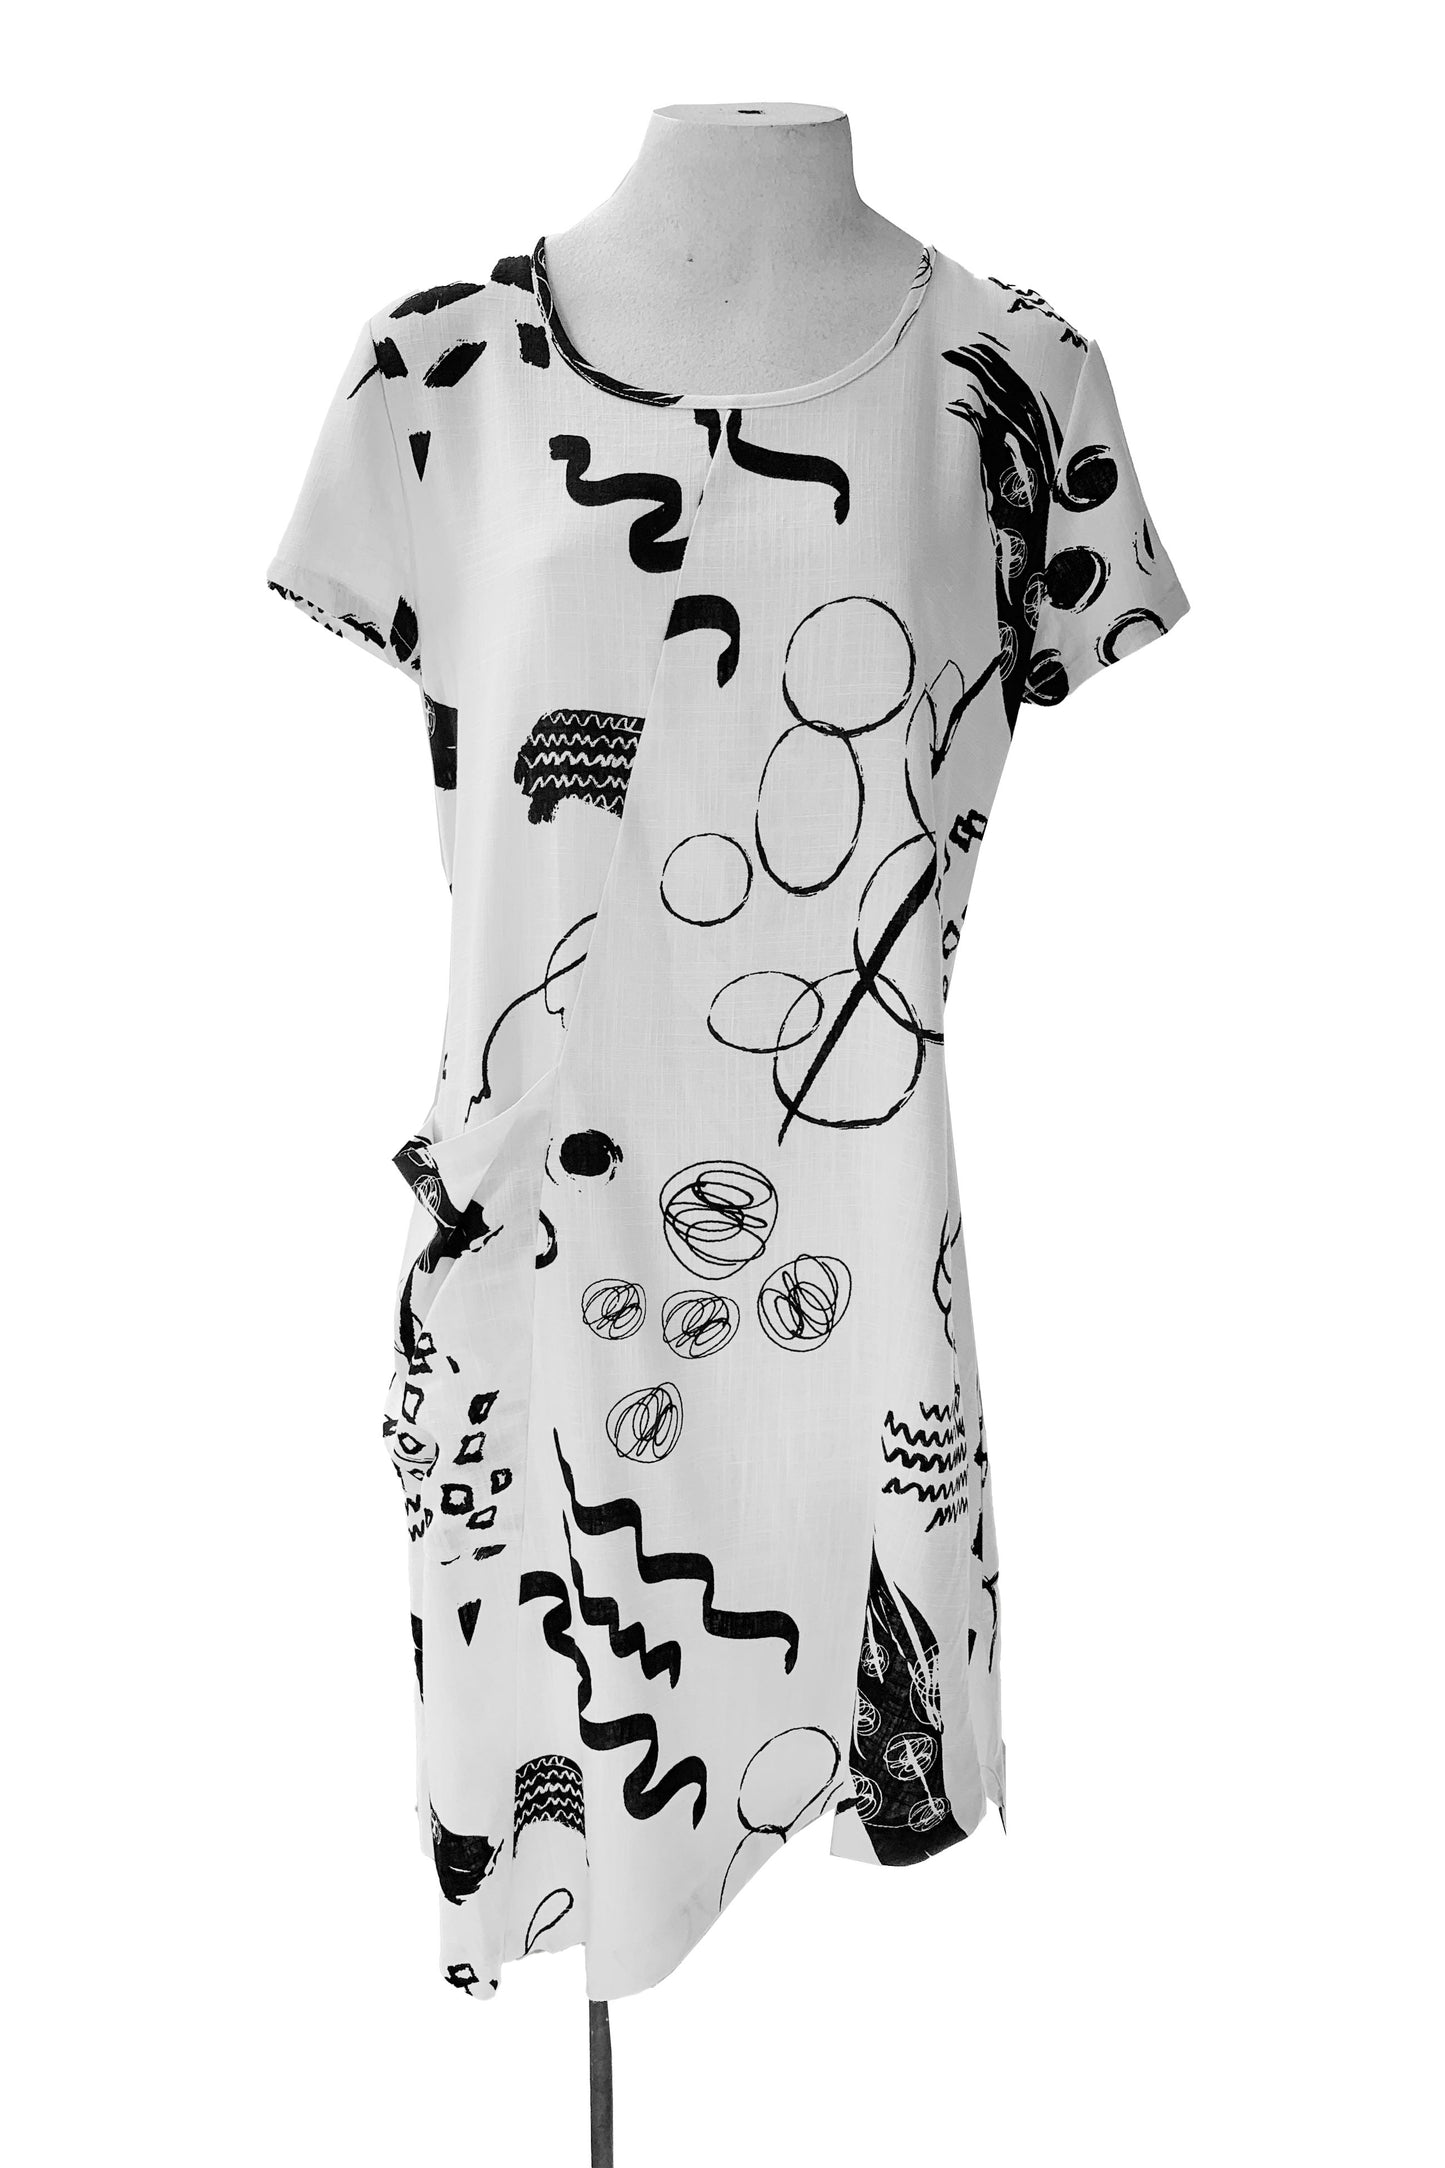 Mika Dress by Compli K, White with black abstract designs, round neck, short sleeves, diagonal seams, asymmetrical hem, one pouch pocket, eco-fabric, rayon and linen, sizes XS to XXL, made in Montreal